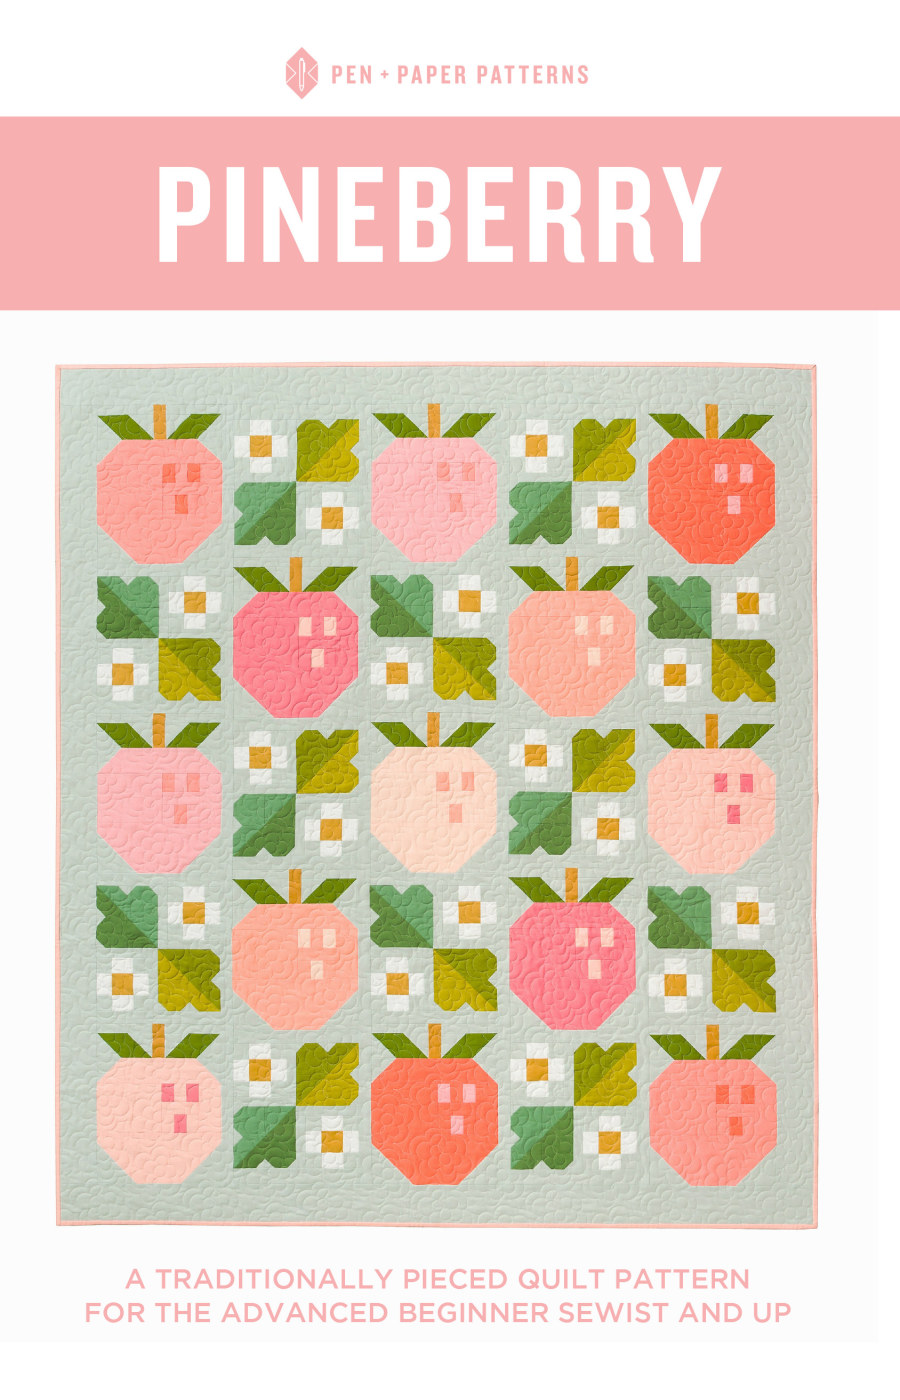 Pineberry Quilt Pattern by Pen + Paper